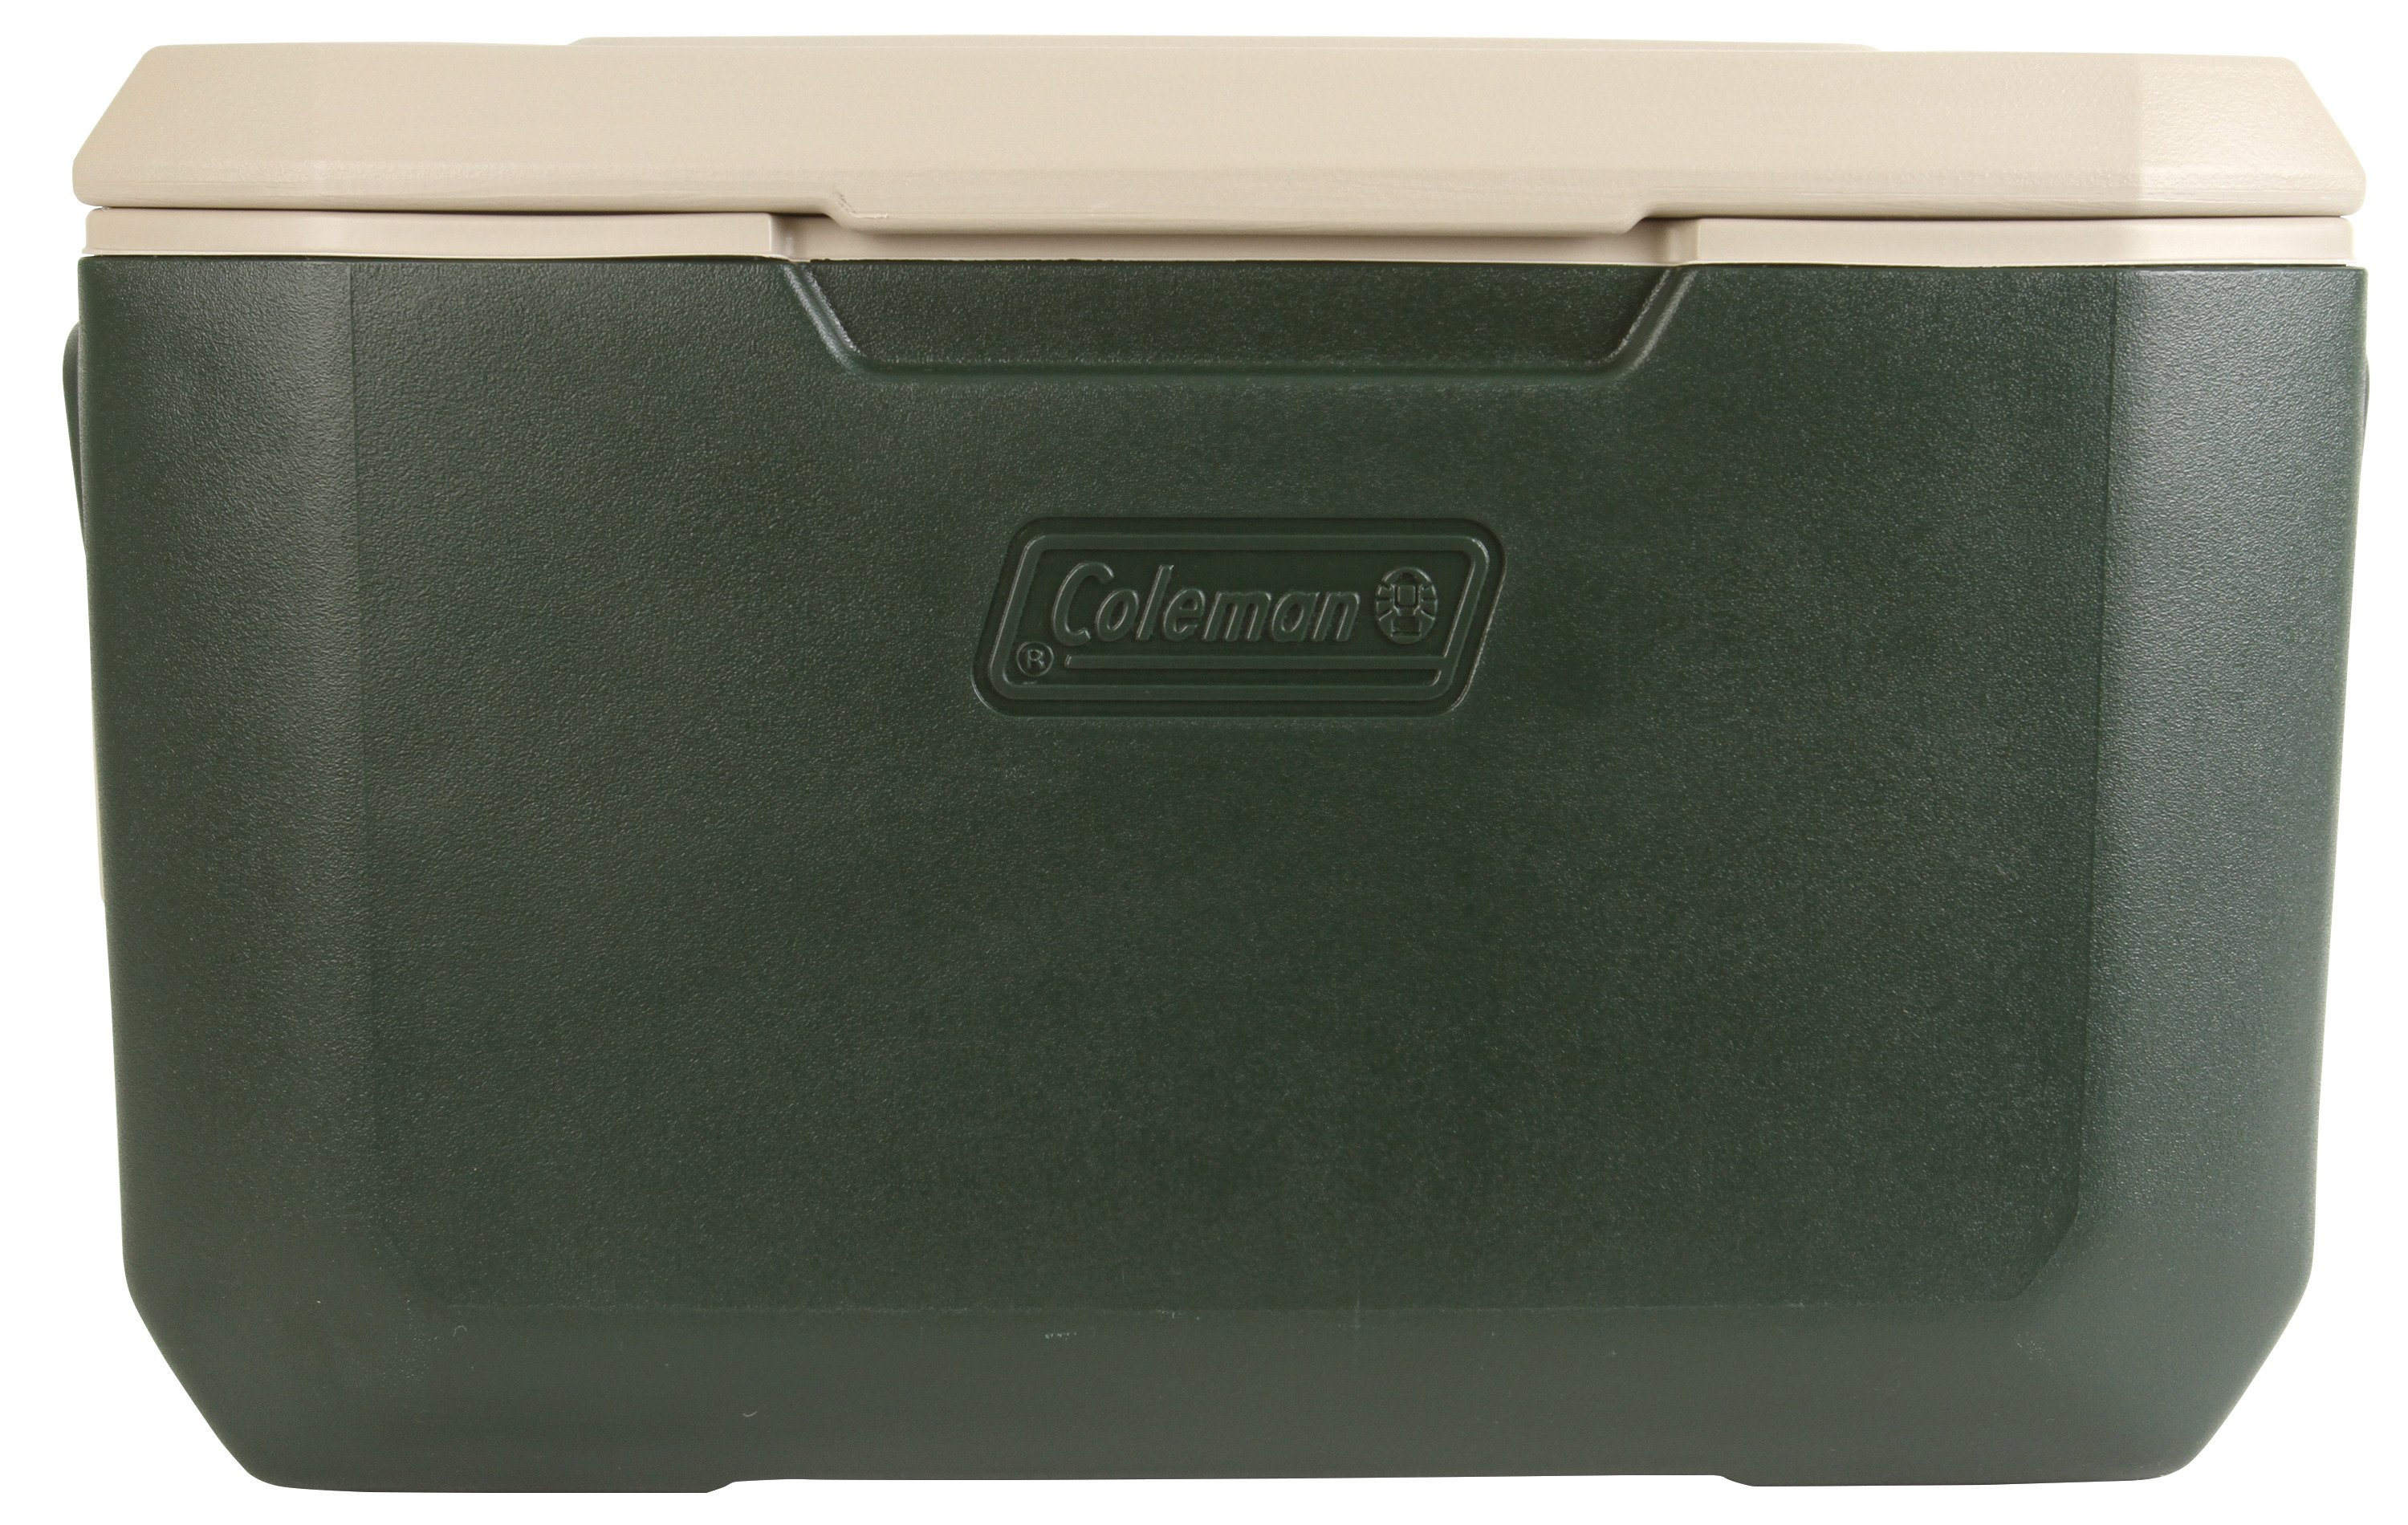 Coleman 70 Quart Xtreme 5 Day Heavy Duty Cooler, Green - image 3 of 6